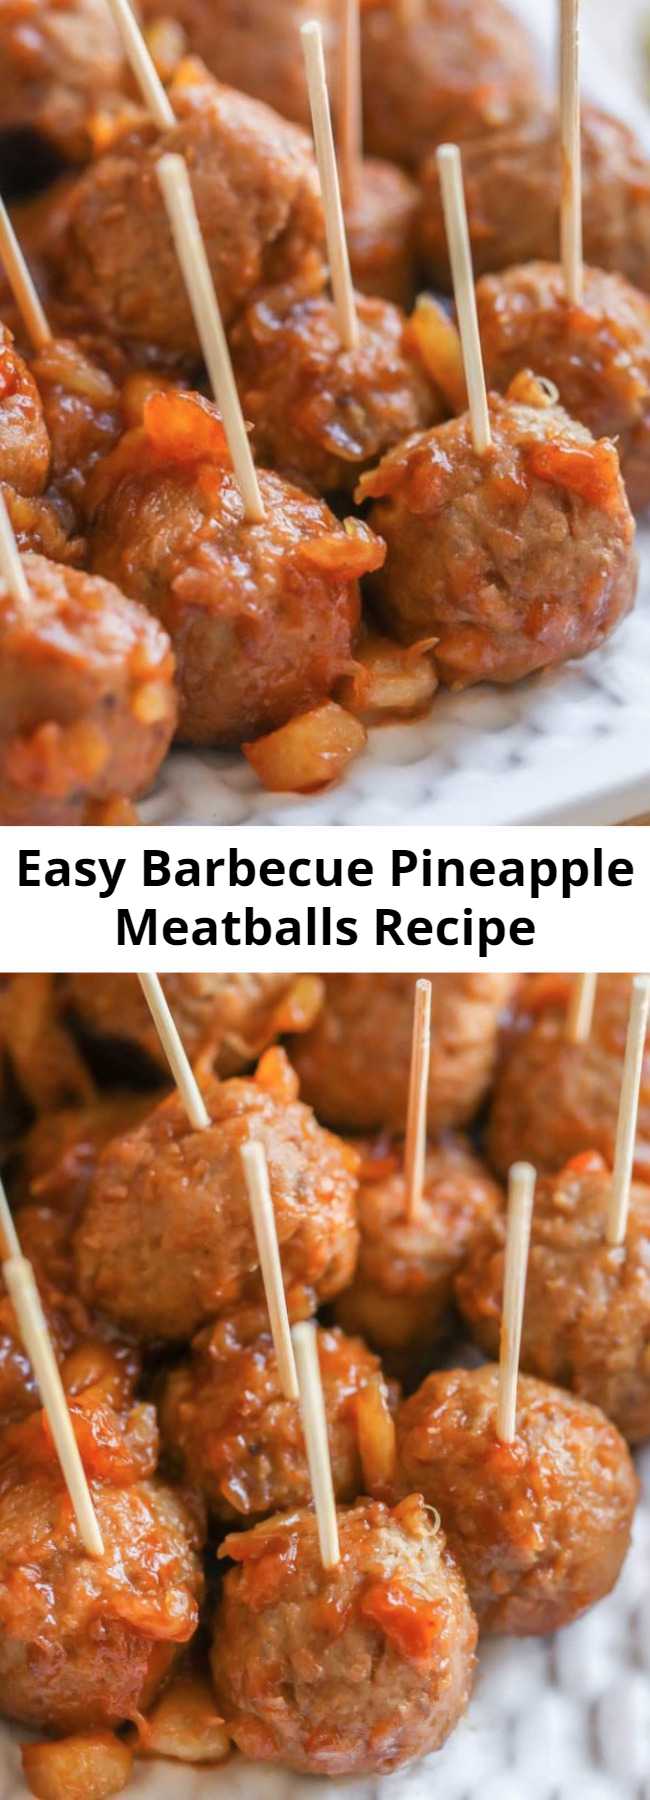 Easy Barbecue Pineapple Meatballs Recipe - These Barbecue Pineapple Meatballs use just 3 ingredients - barbecue sauce, frozen meatballs, and crushed pineapple. They are perfect as an appetizer recipe for parties and get togethers or even a side dish for dinner.